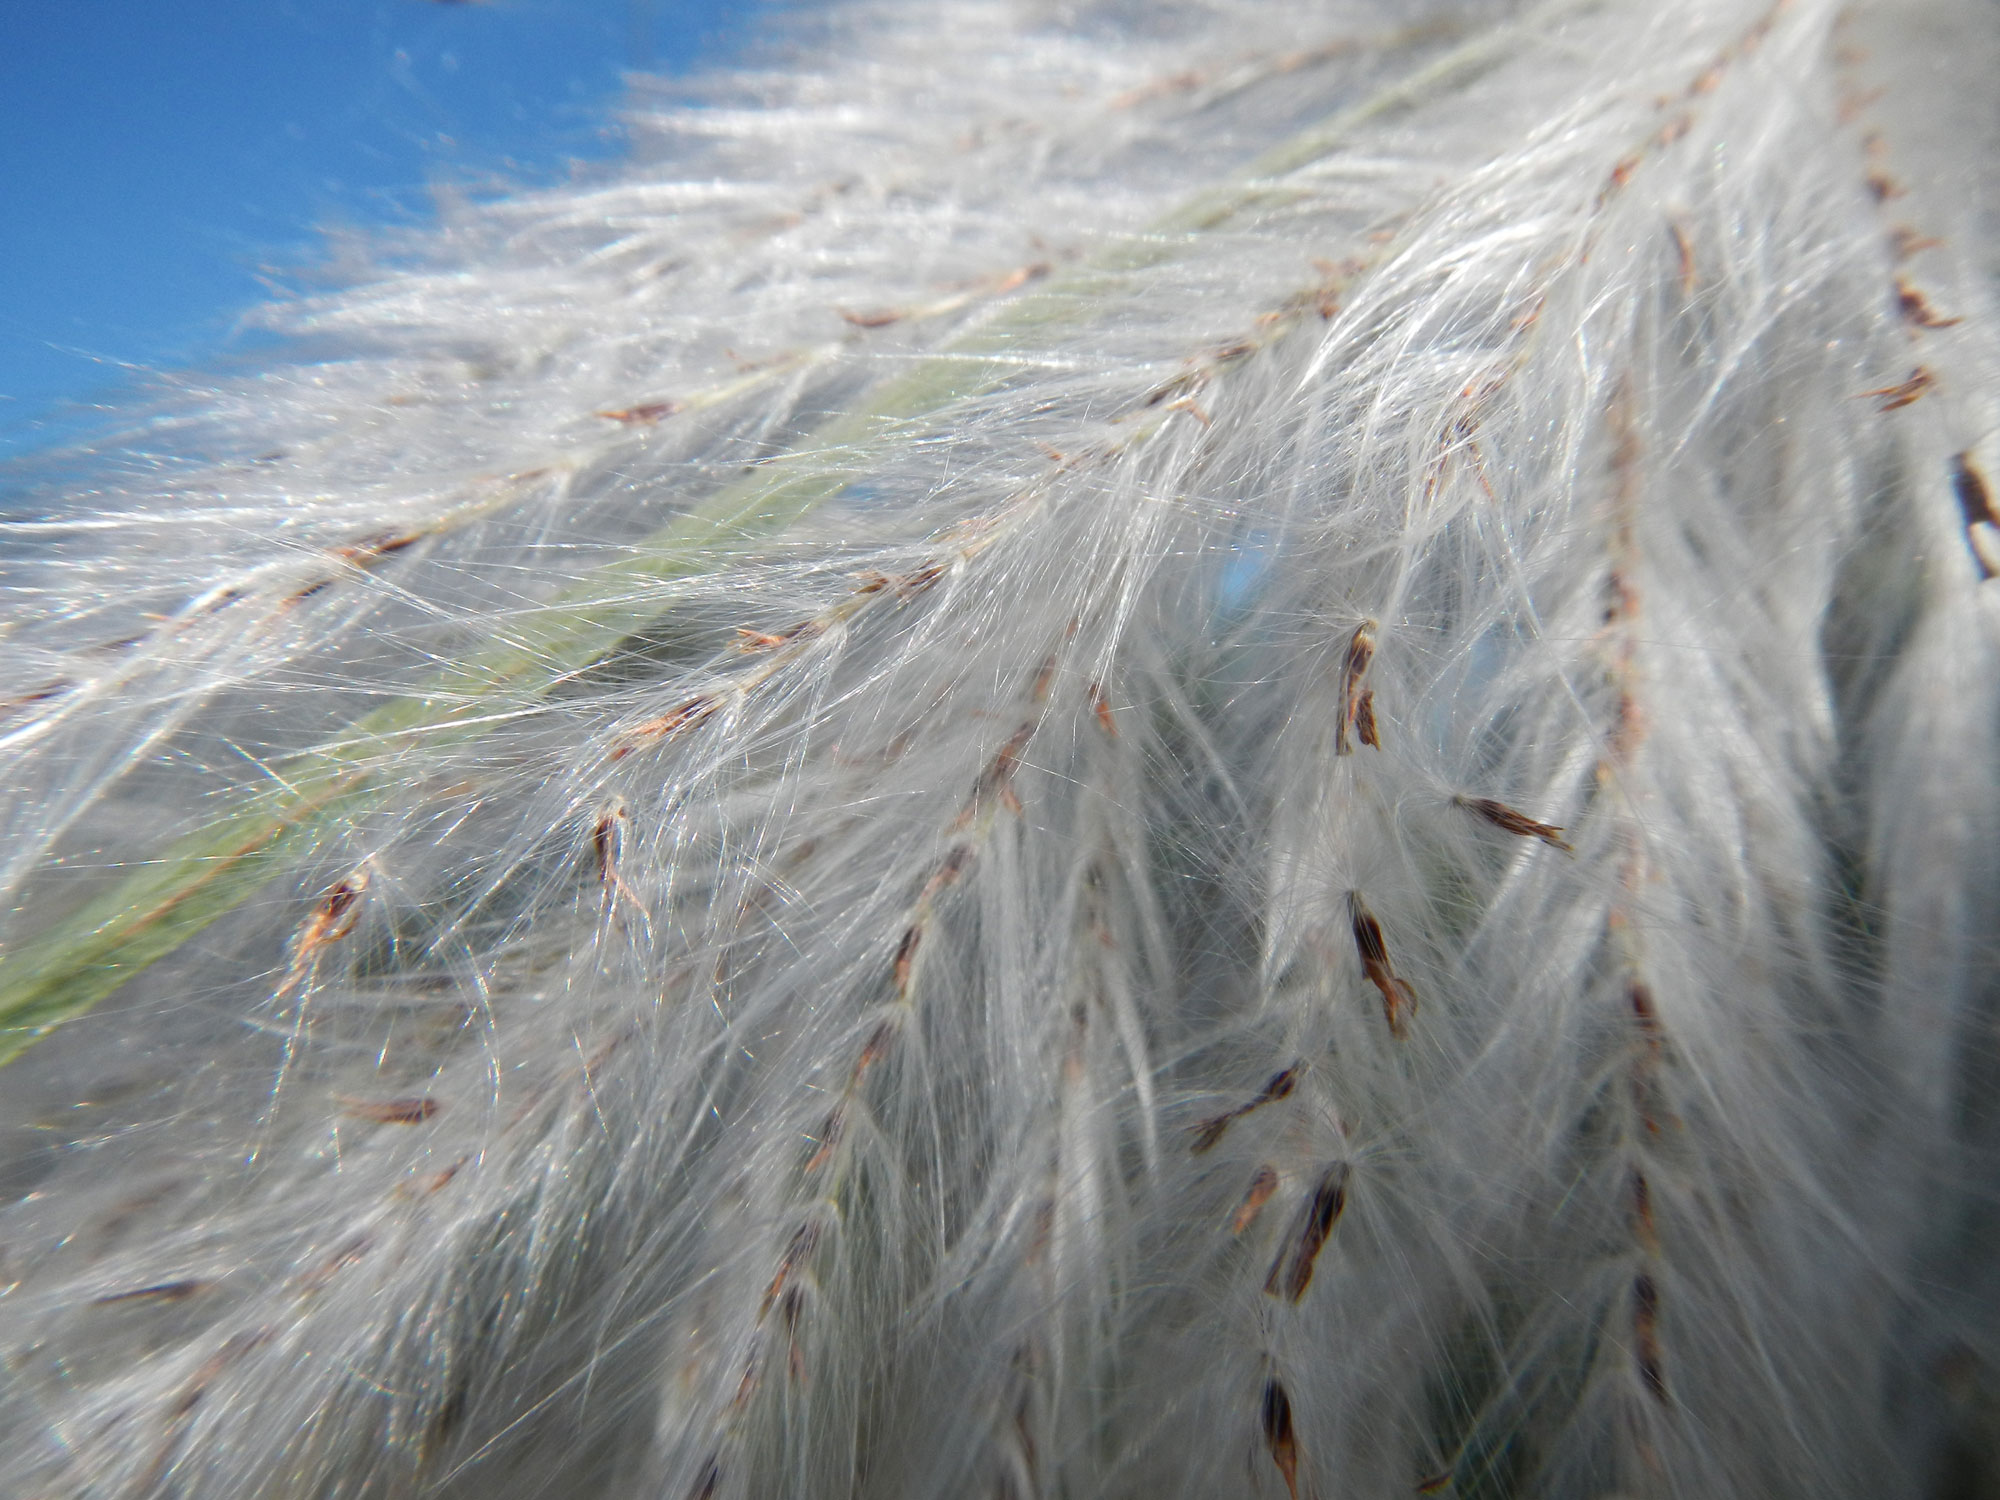 Photograph of part of a feathery inflorescence of a wild sugarcane plant. The photo shows delicate branches with feathery white hairs and brown anthers which have probably shed their pollen.